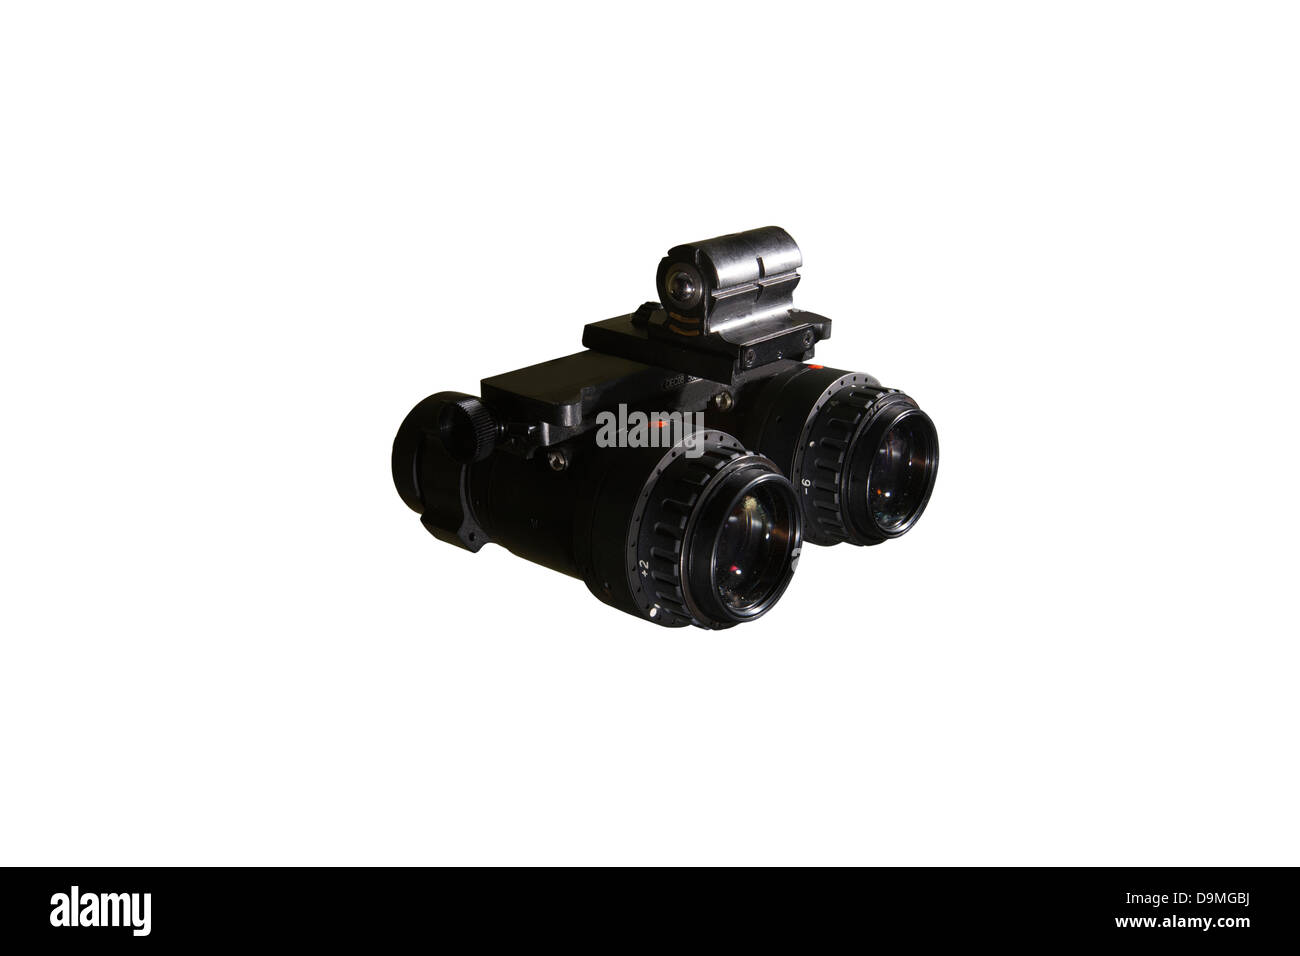 AN/AVS-6 night vision goggles used by the military. Stock Photo